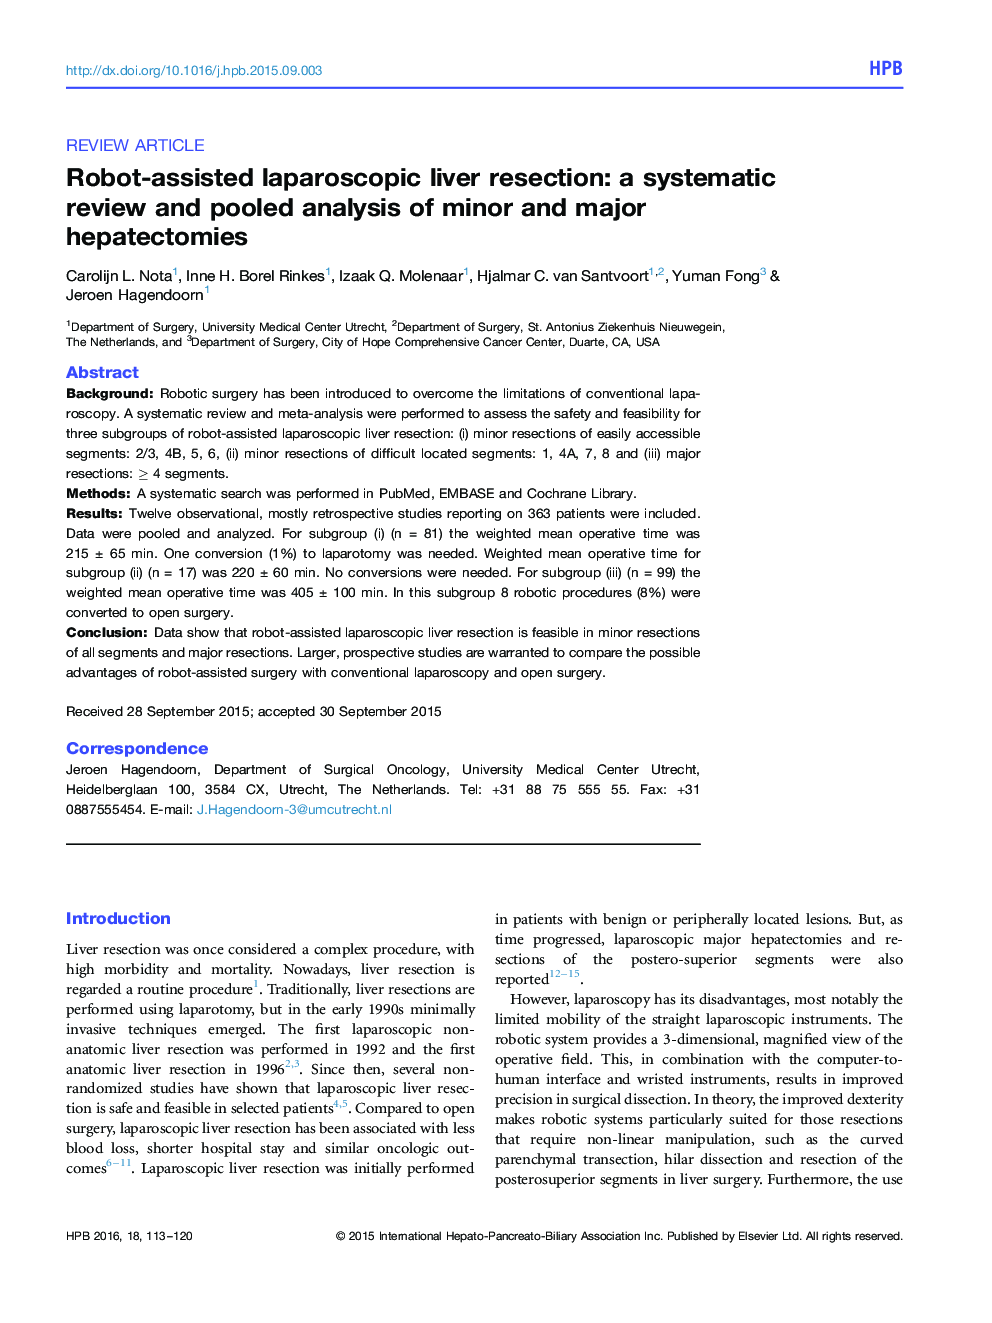 Robot-assisted laparoscopic liver resection: a systematic review and pooled analysis of minor and major hepatectomies